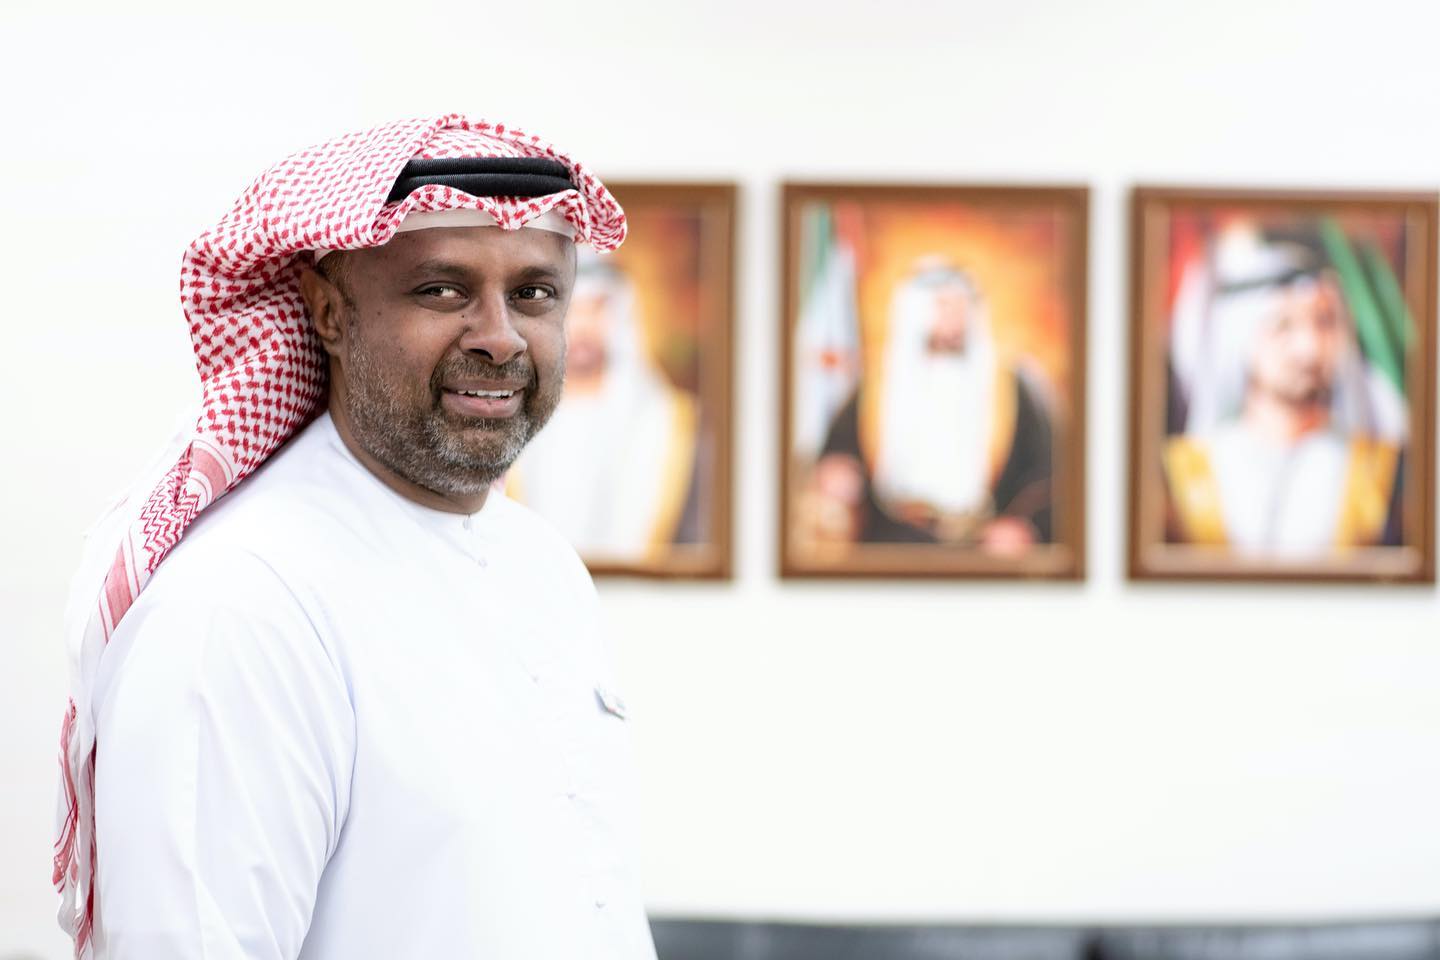 An Arab man stand behind the images of Rulers of UAE